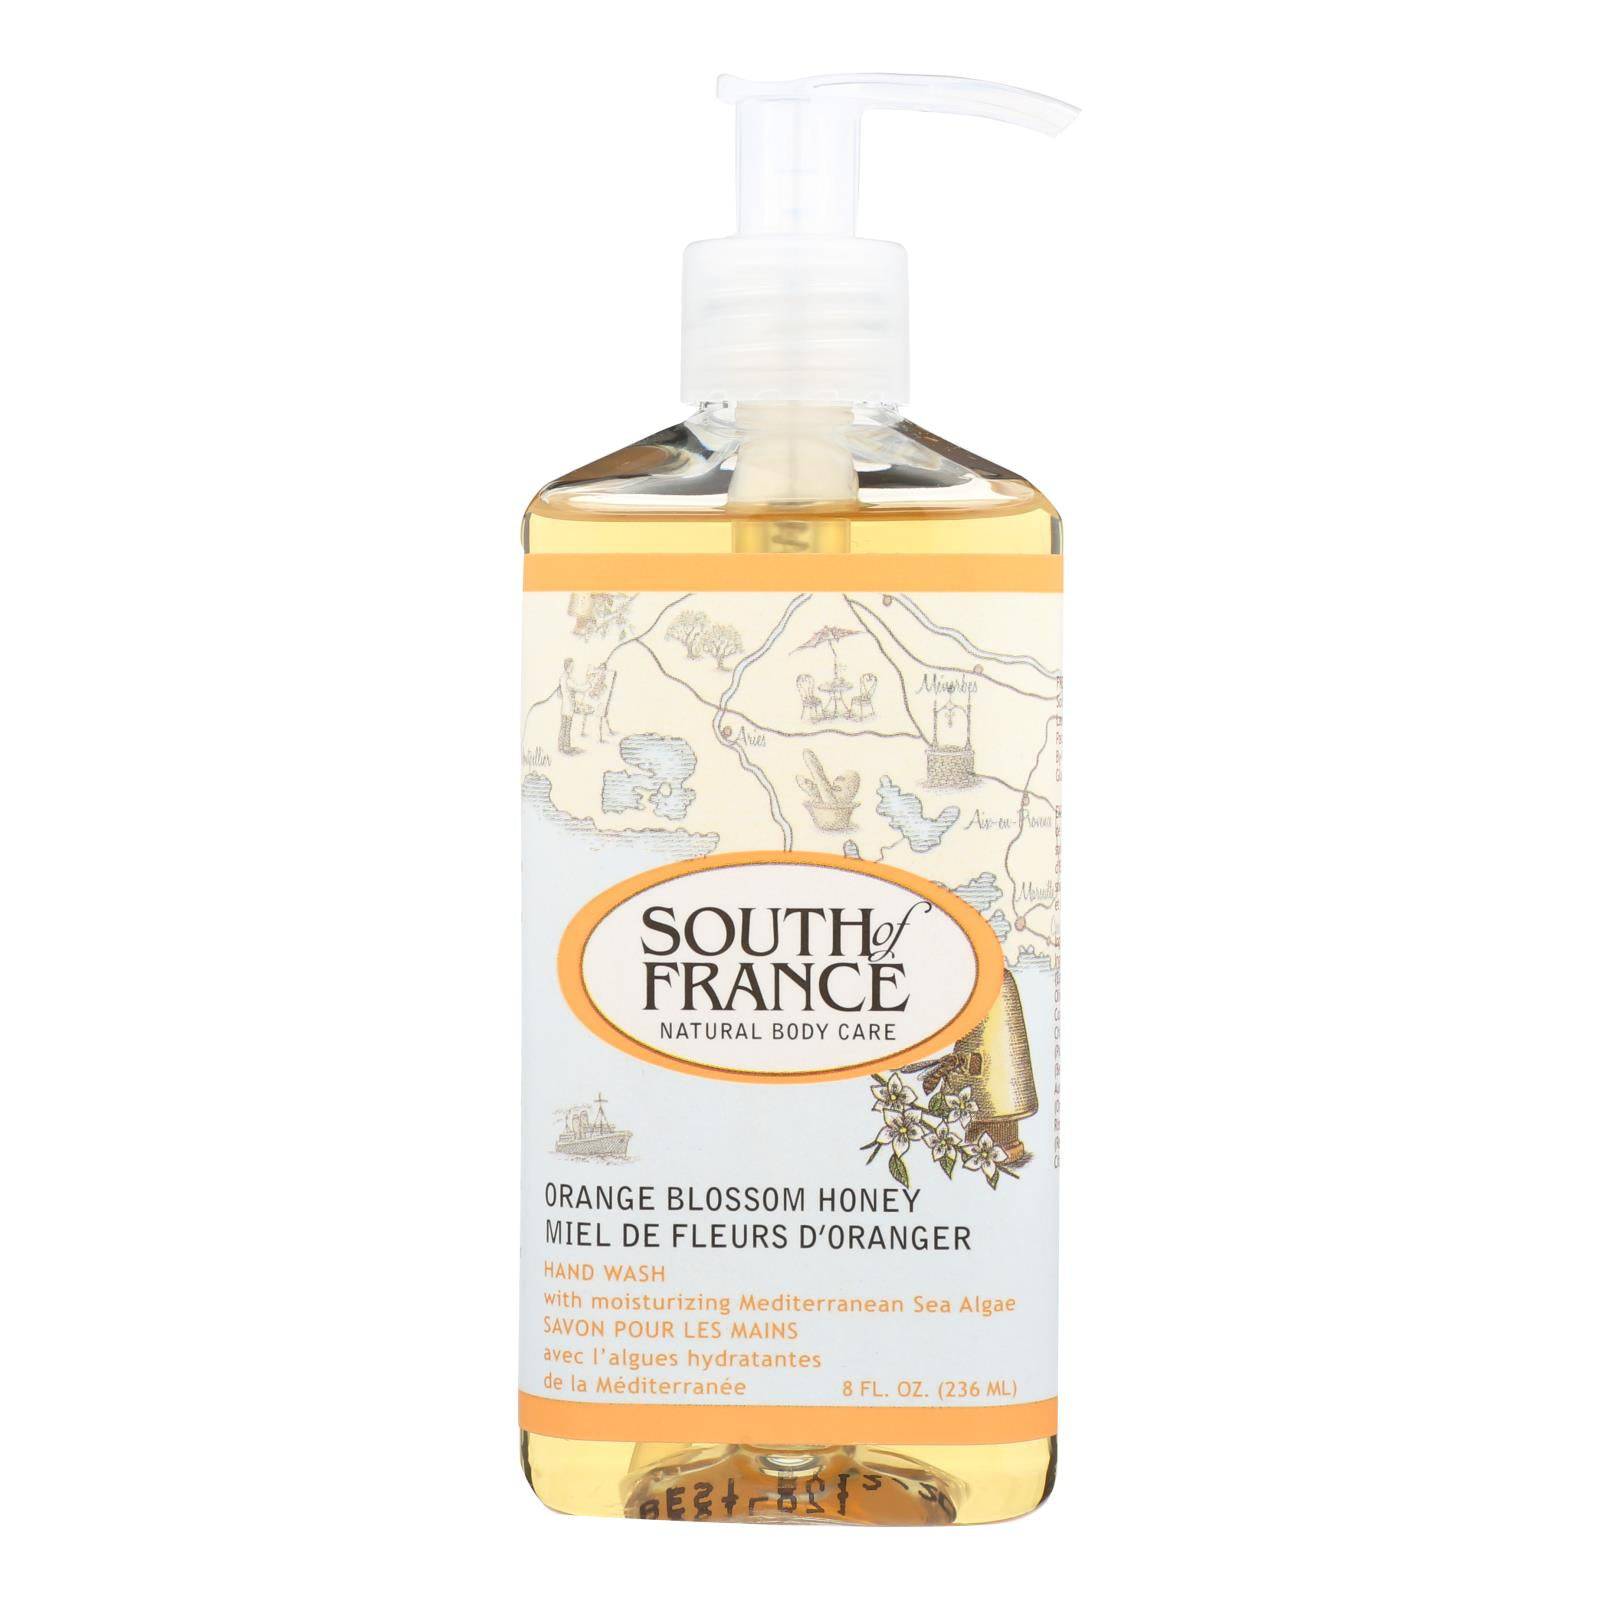 Buy South Of France Hand Wash - Orange Blossom Honey - 8 Oz - 1 Each  at OnlyNaturals.us